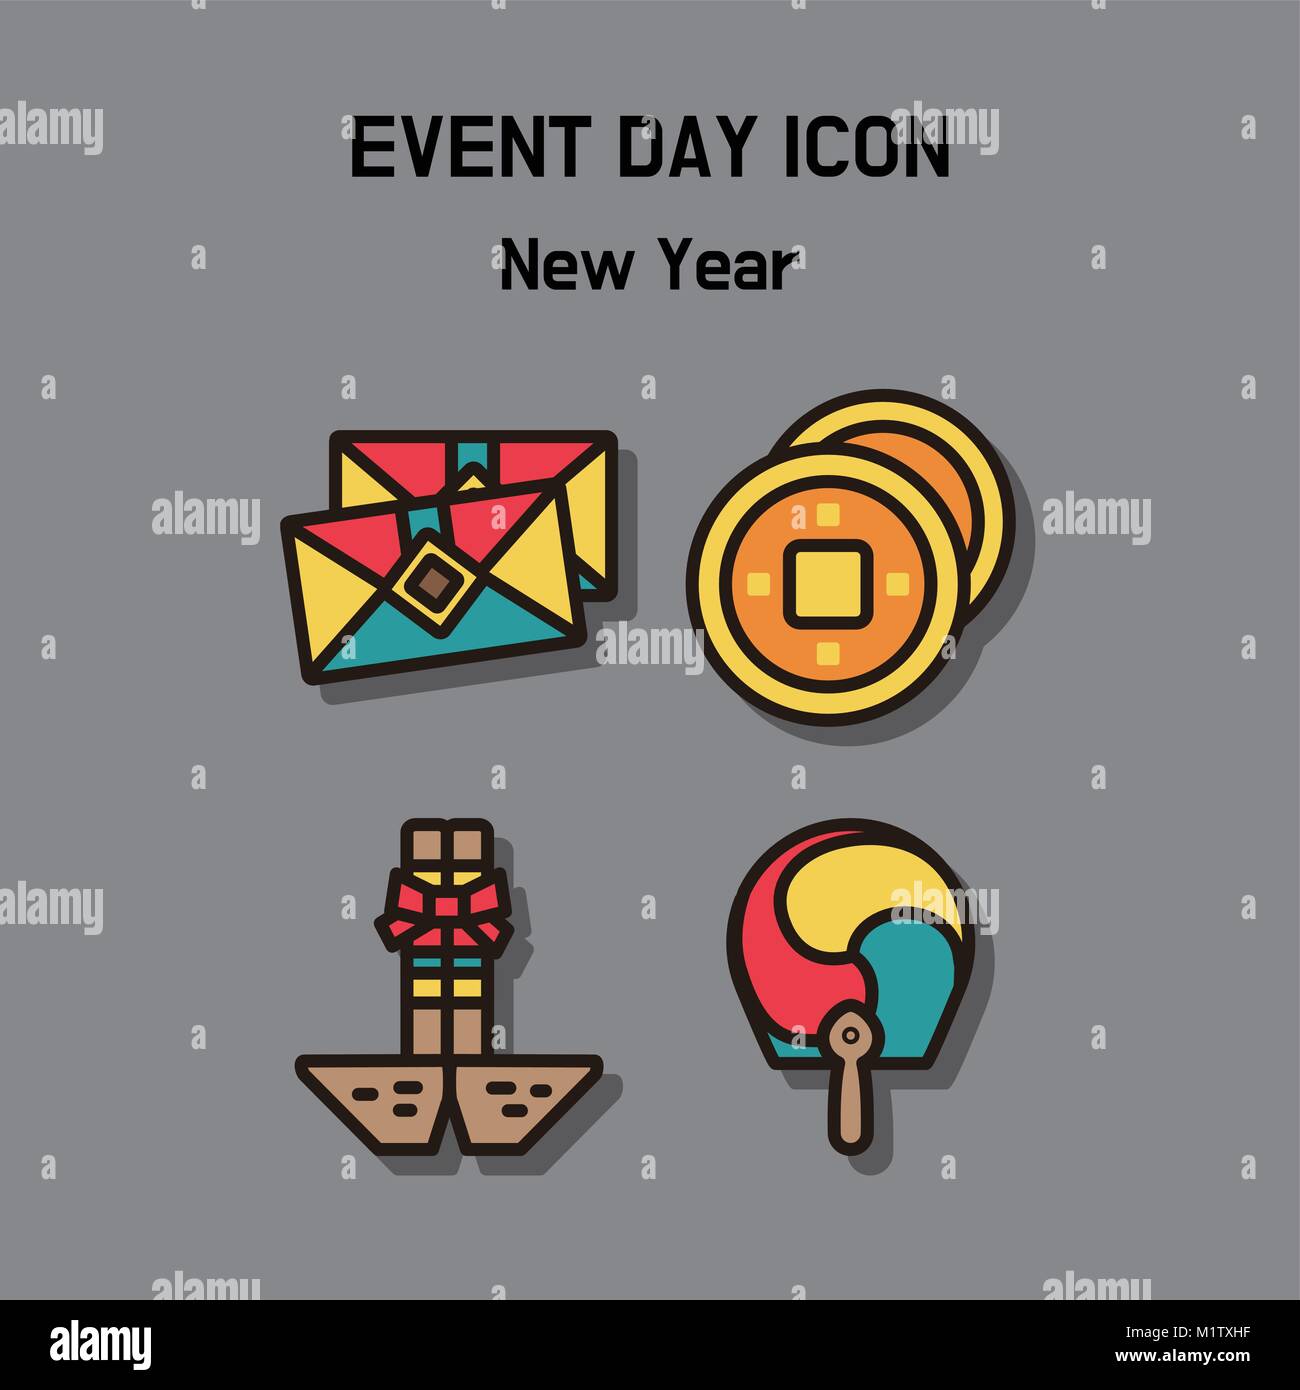 Event day icon set. Express all kinds of event as character icon set. 048 Stock Vector